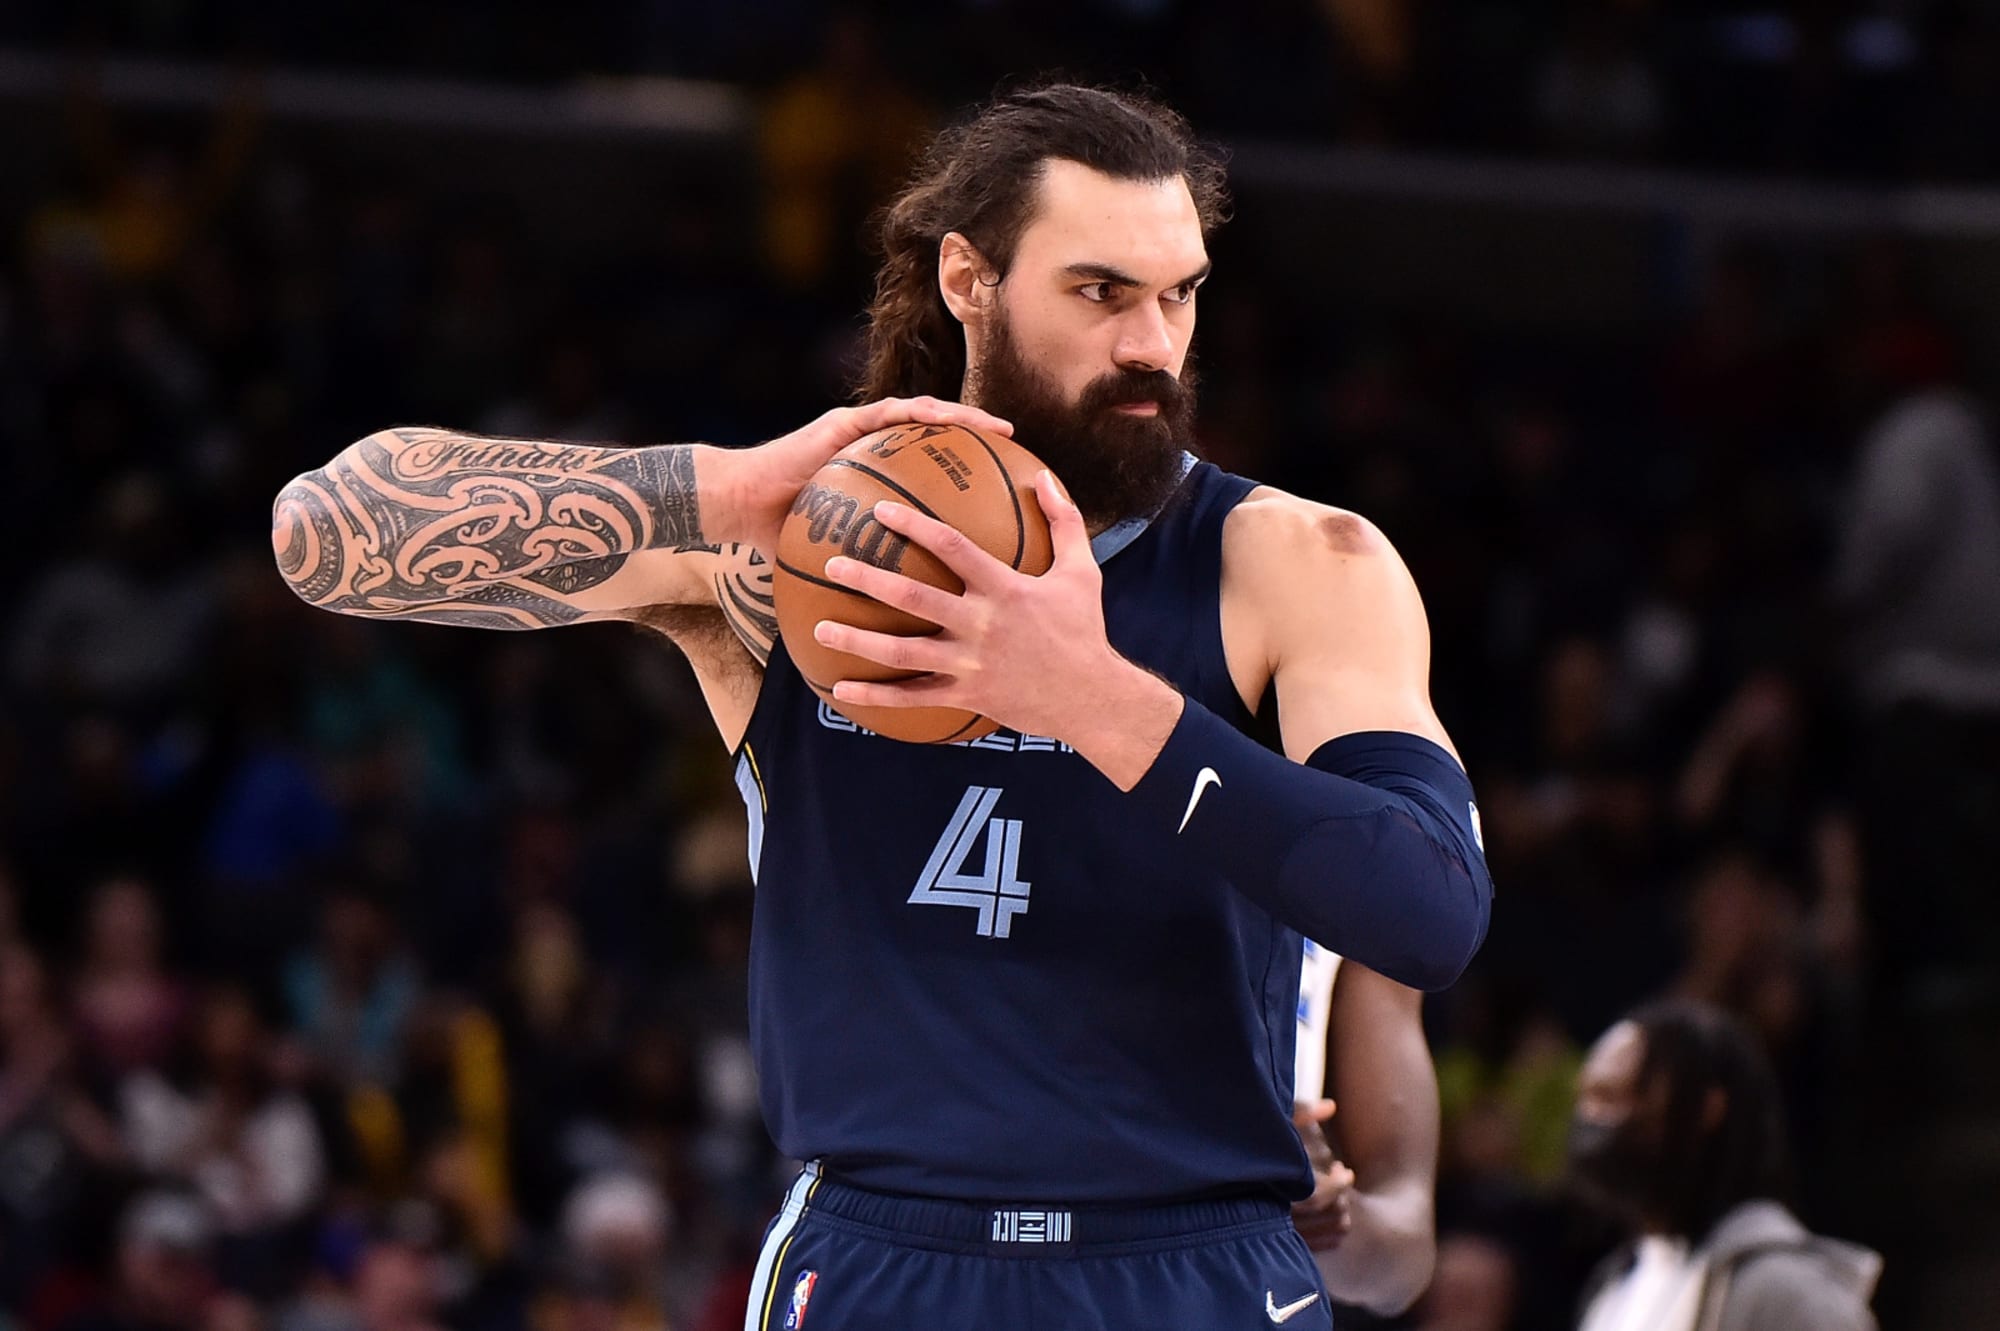 Could Steven Adams be the key to success for Grizzlies in 202223